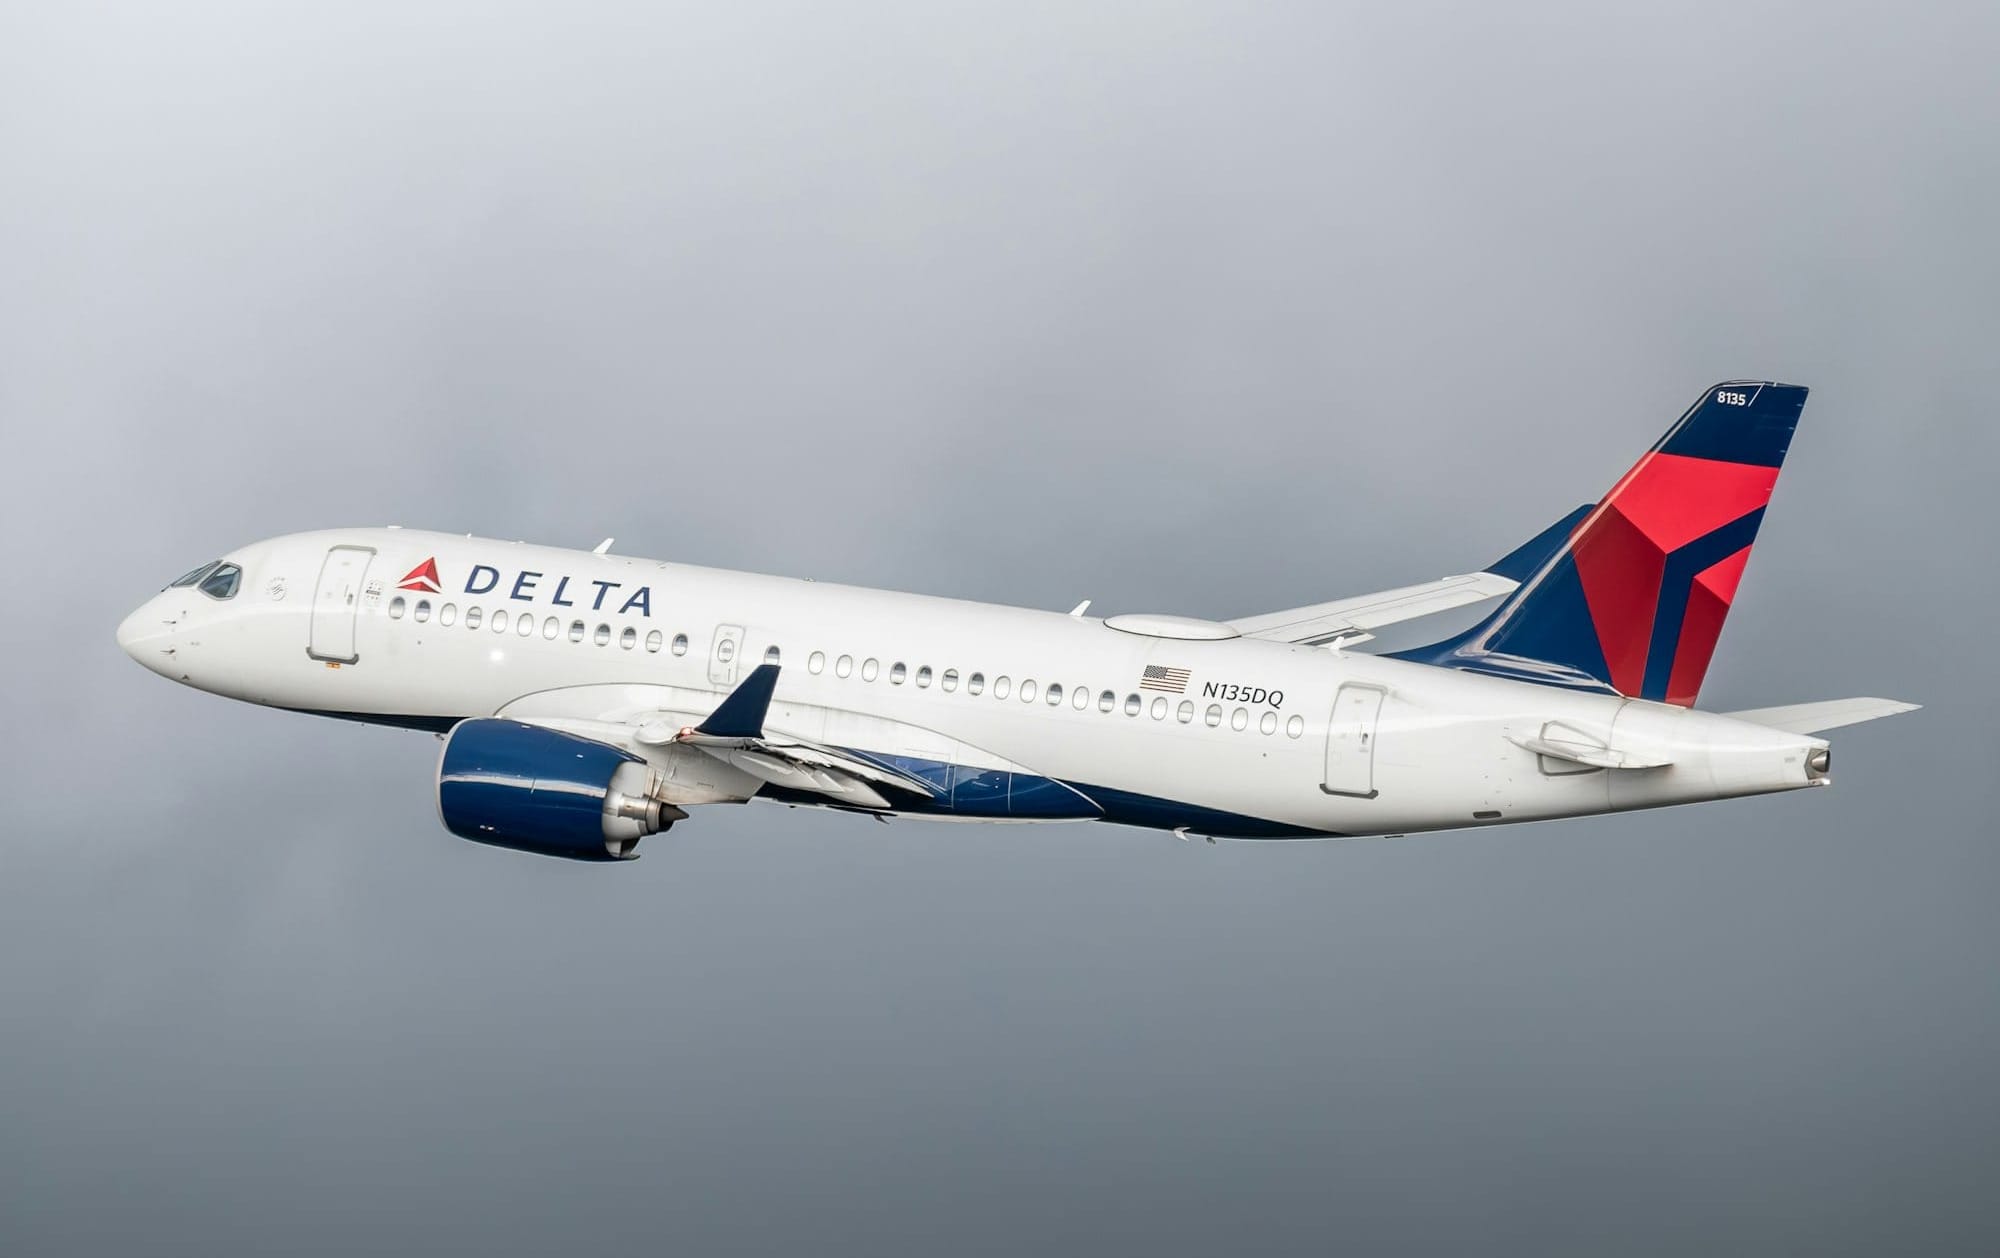 Delta Airlines Prepares for Busy Winter Holiday Season Following Robust November Performance